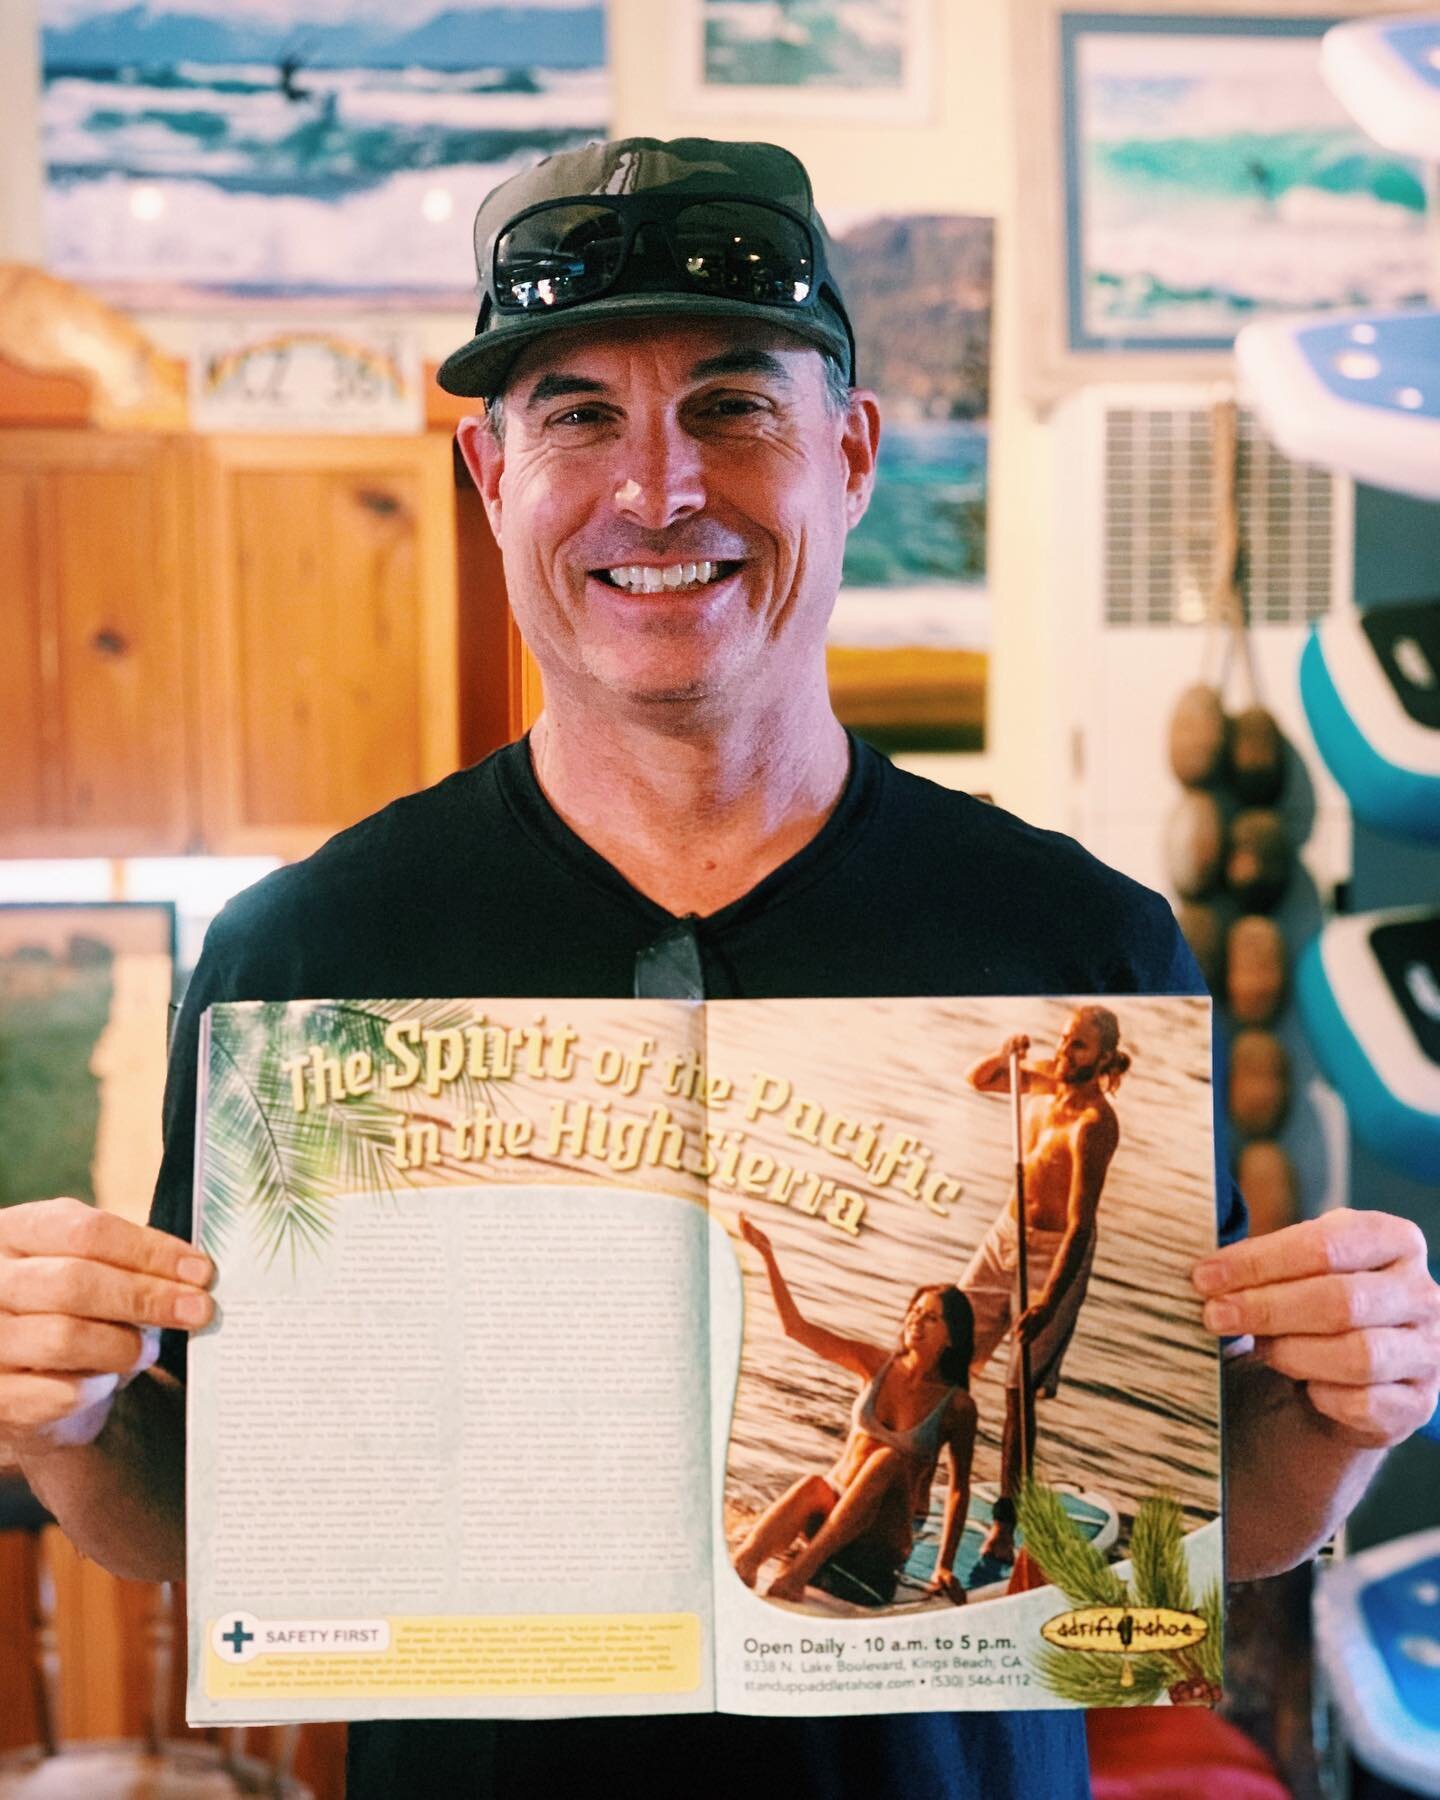 The Spirit of the Pacific in the High Sierra🌴🗿🌊 #adrifttahoe 
Grab your Tahoe.com magazine today to read about us! 
.
.
.
.
#paddleboardingadventures #laketahoe  #kayak #sup #surftahoe #aloha #suprental